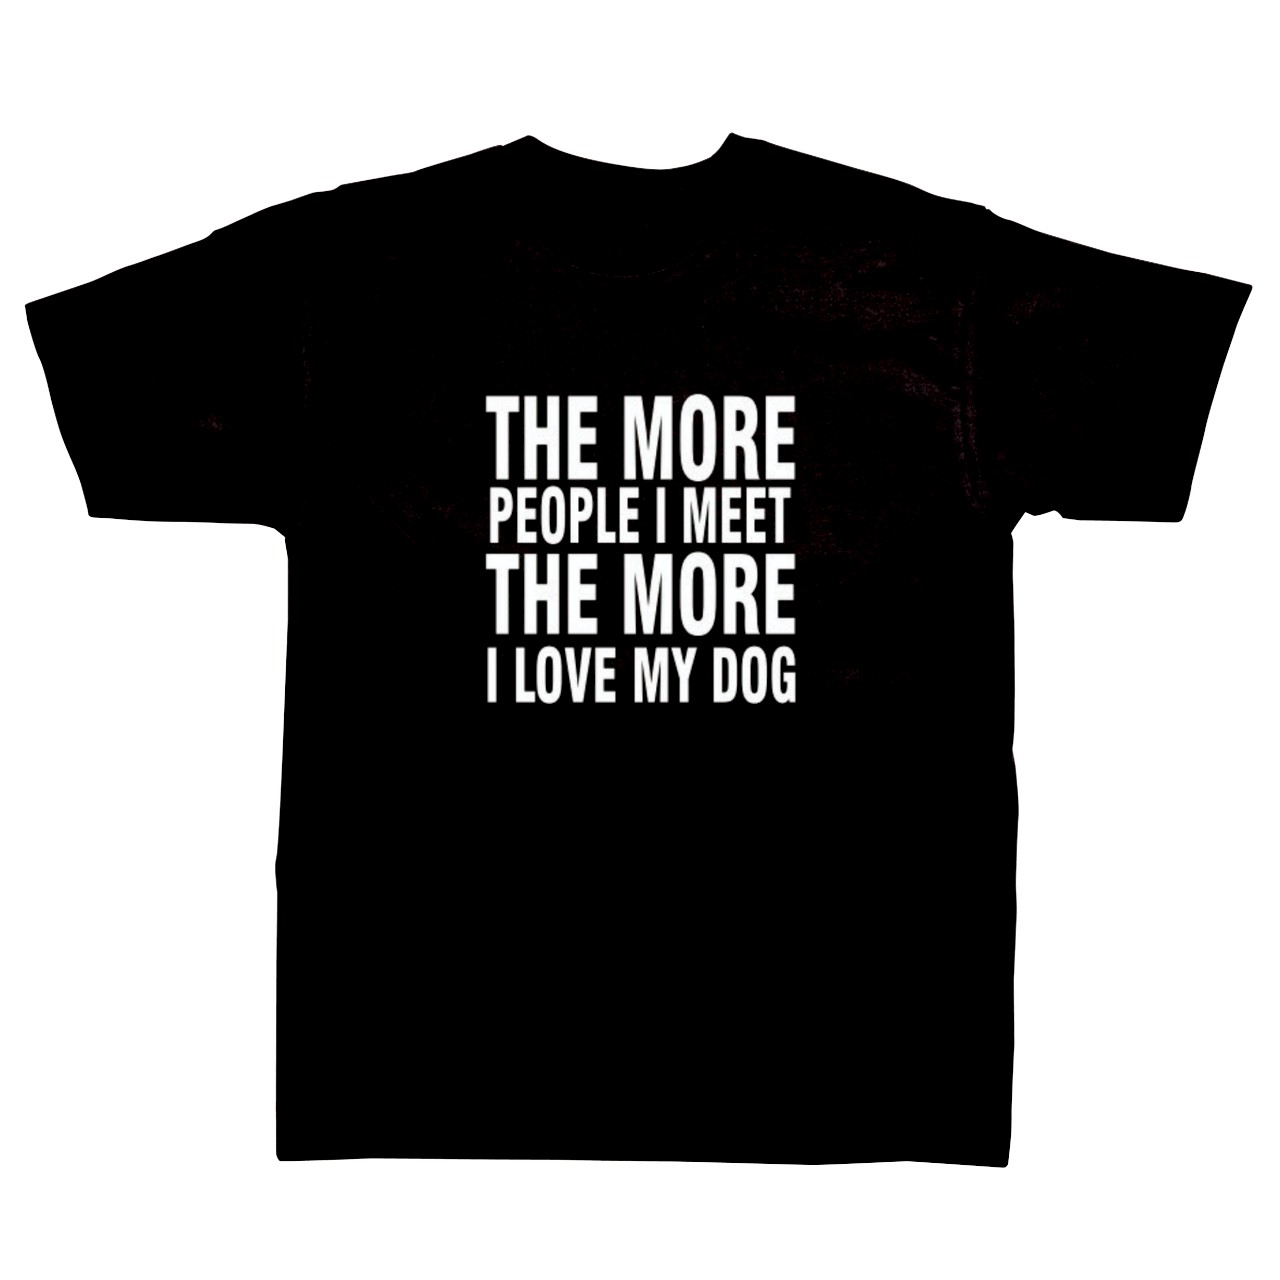 Slogan T-shirt - The More People I Meet the More I Love my Dog